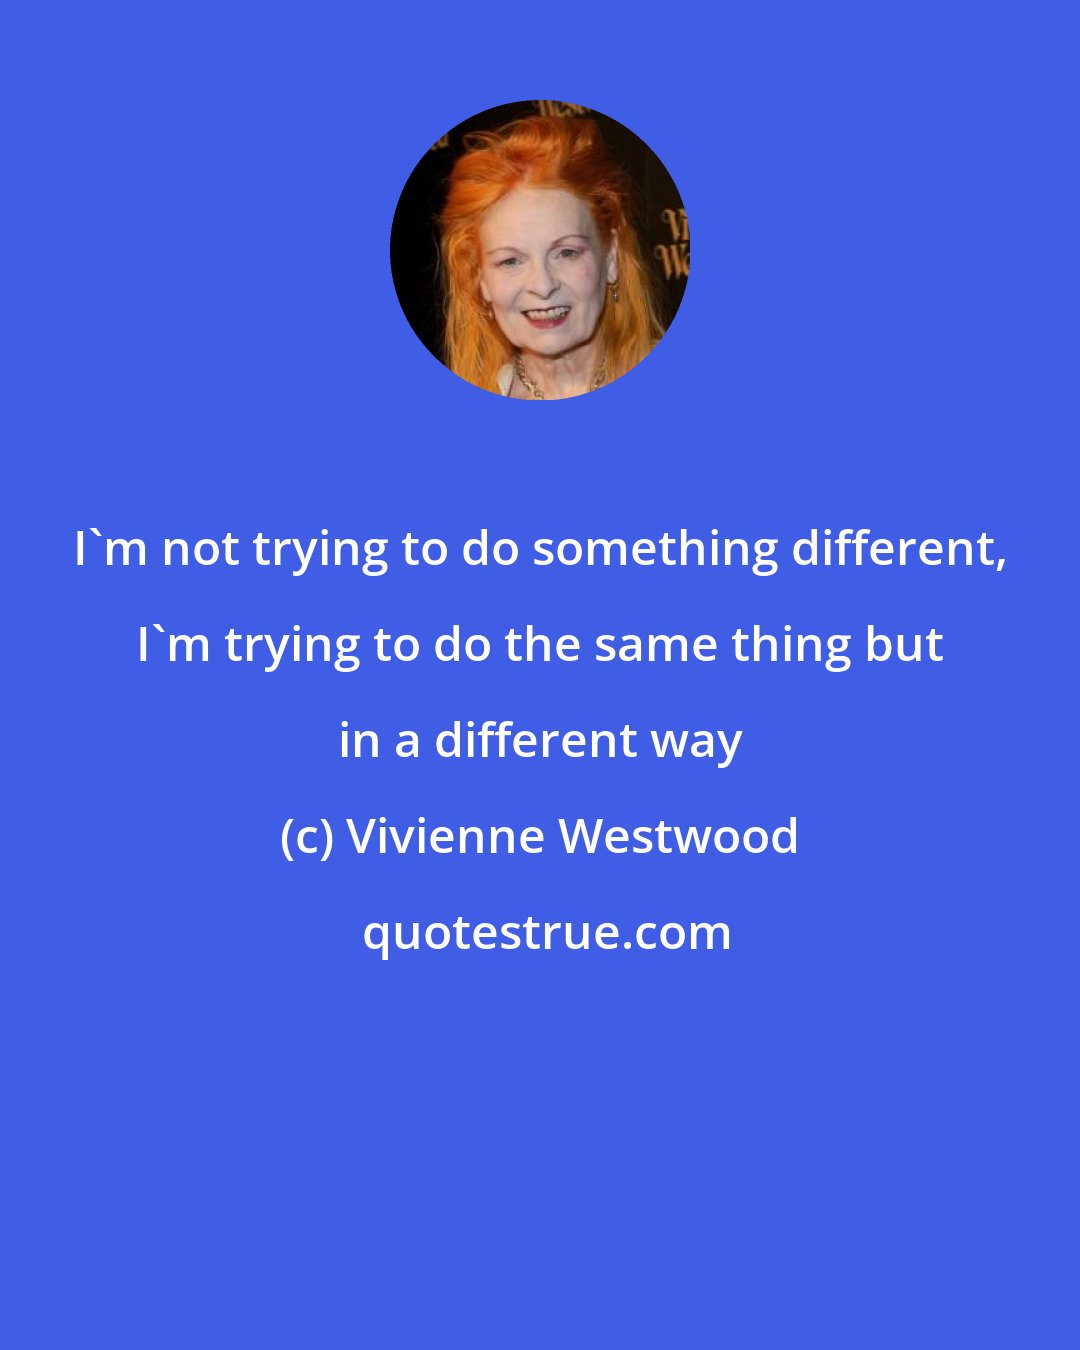 Vivienne Westwood: I'm not trying to do something different, I'm trying to do the same thing but in a different way